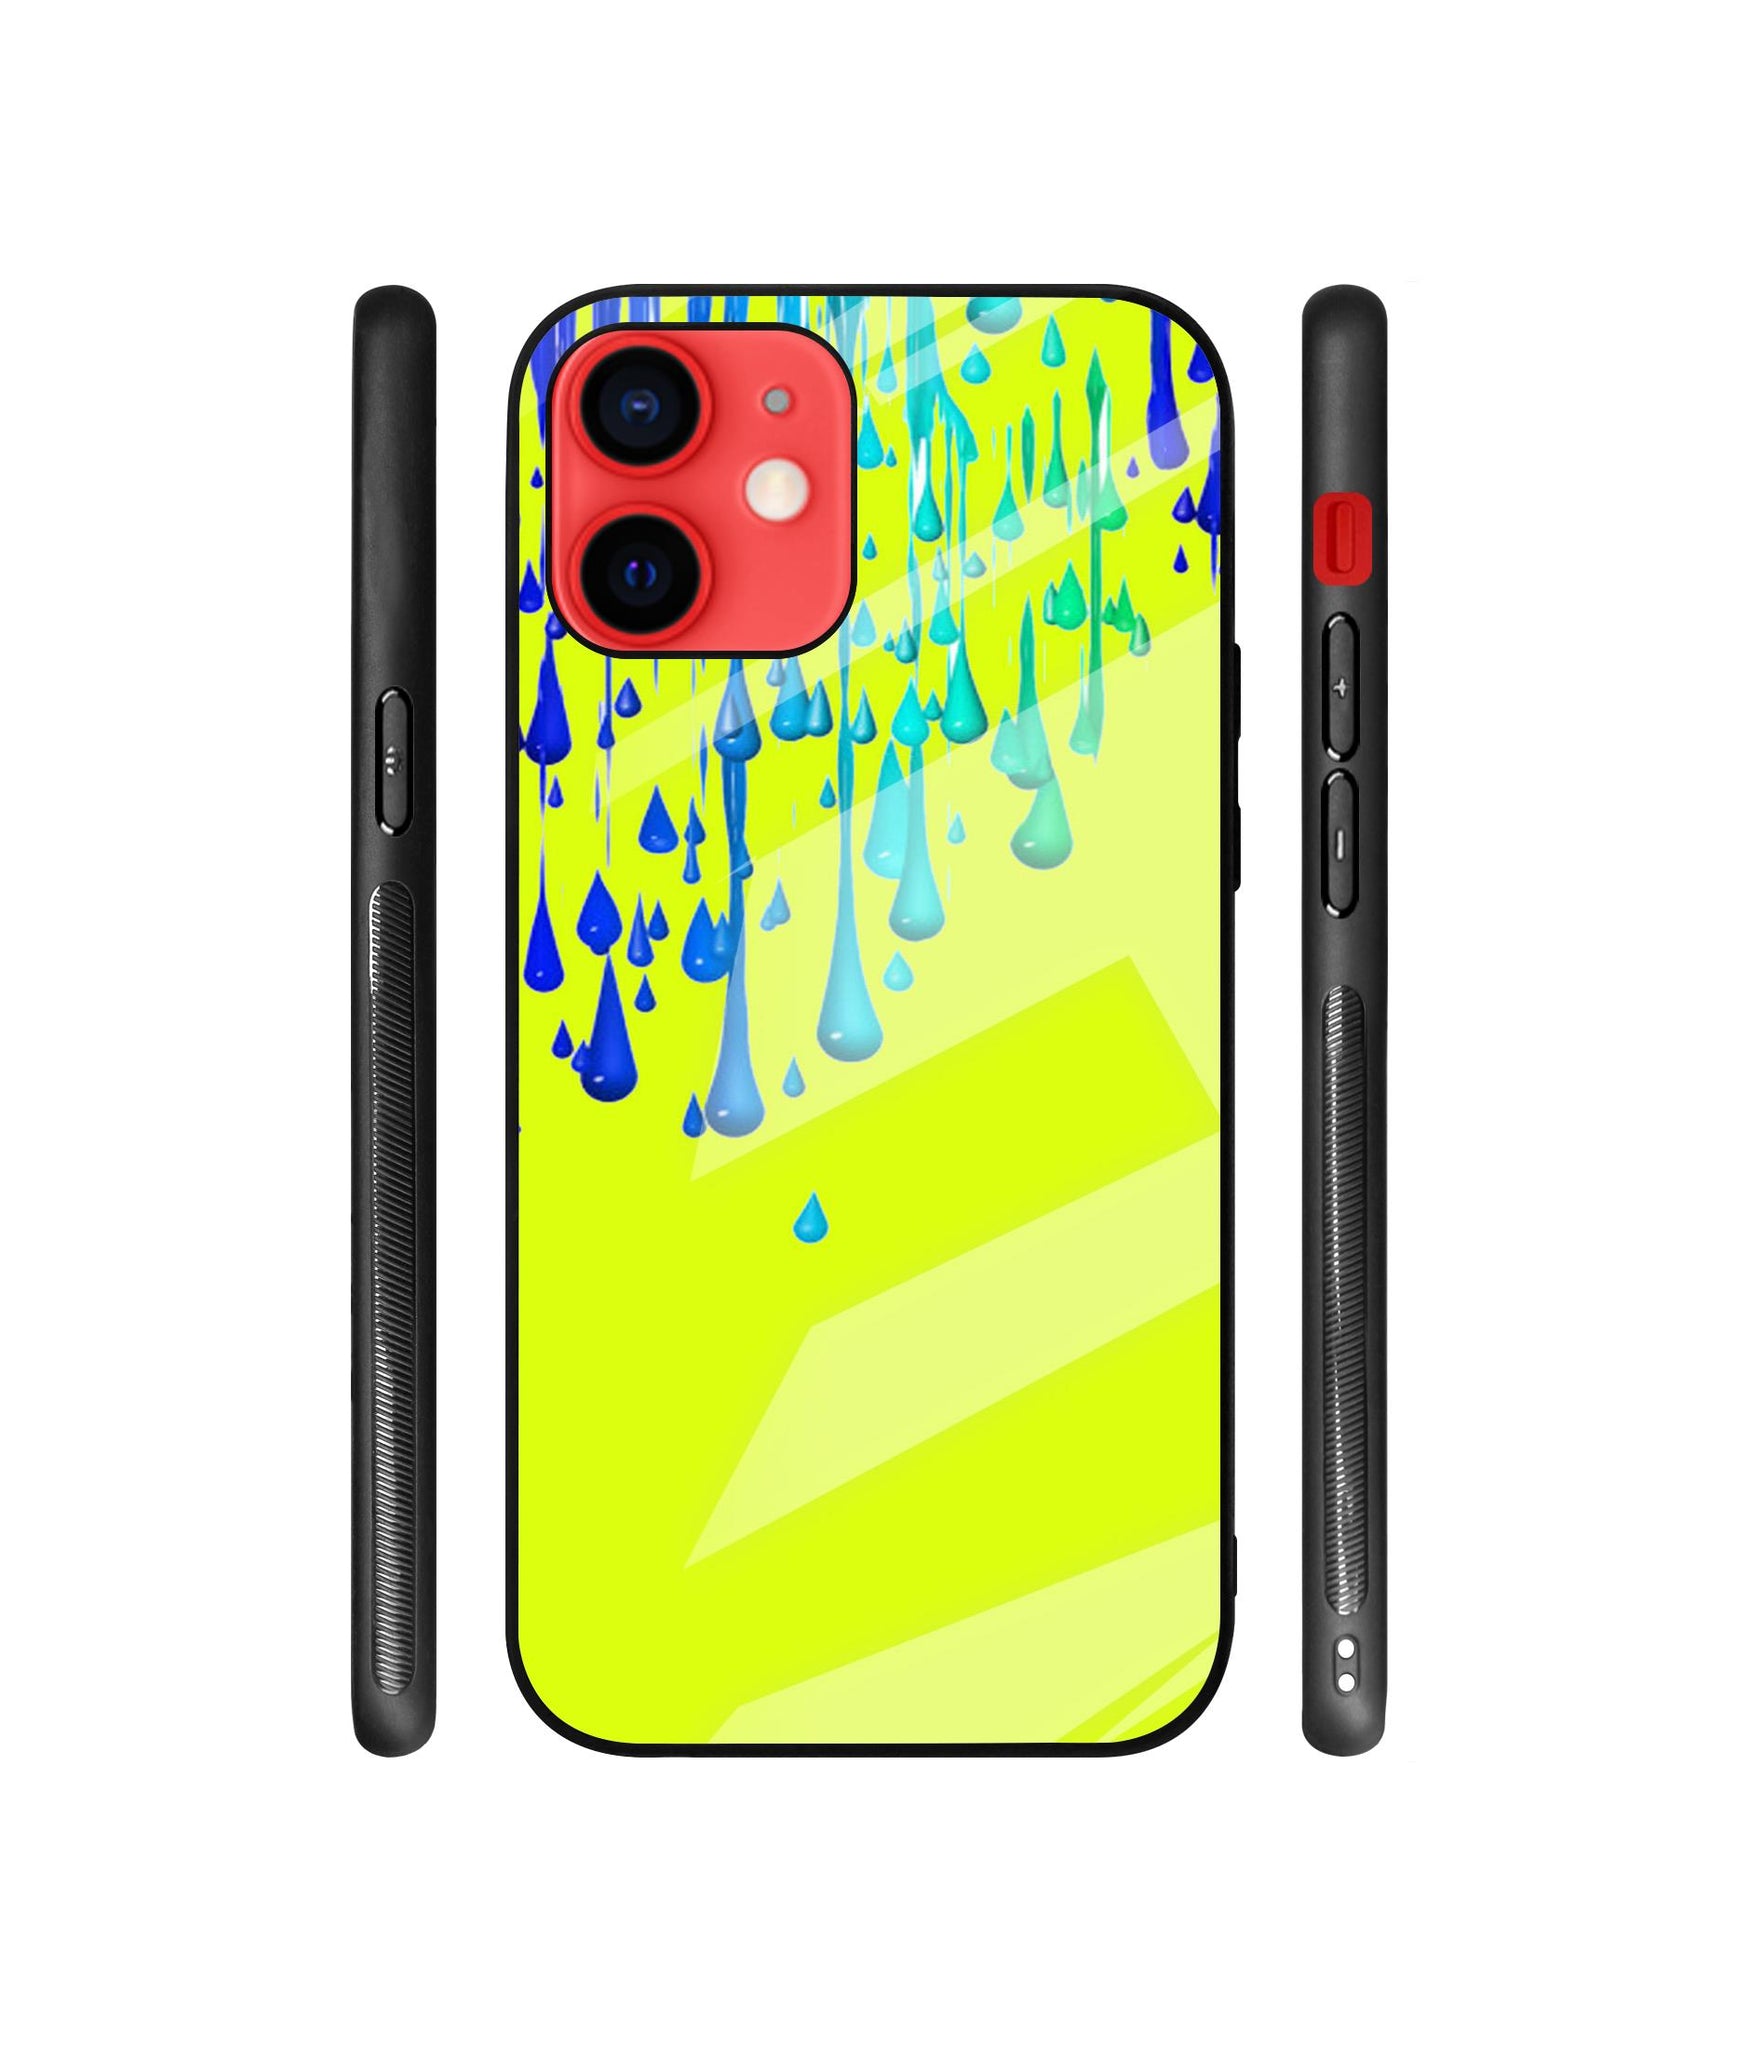 Neon Paint Designer Printed Glass Cover for Apple iPhone 12 / iPhone 12 Pro